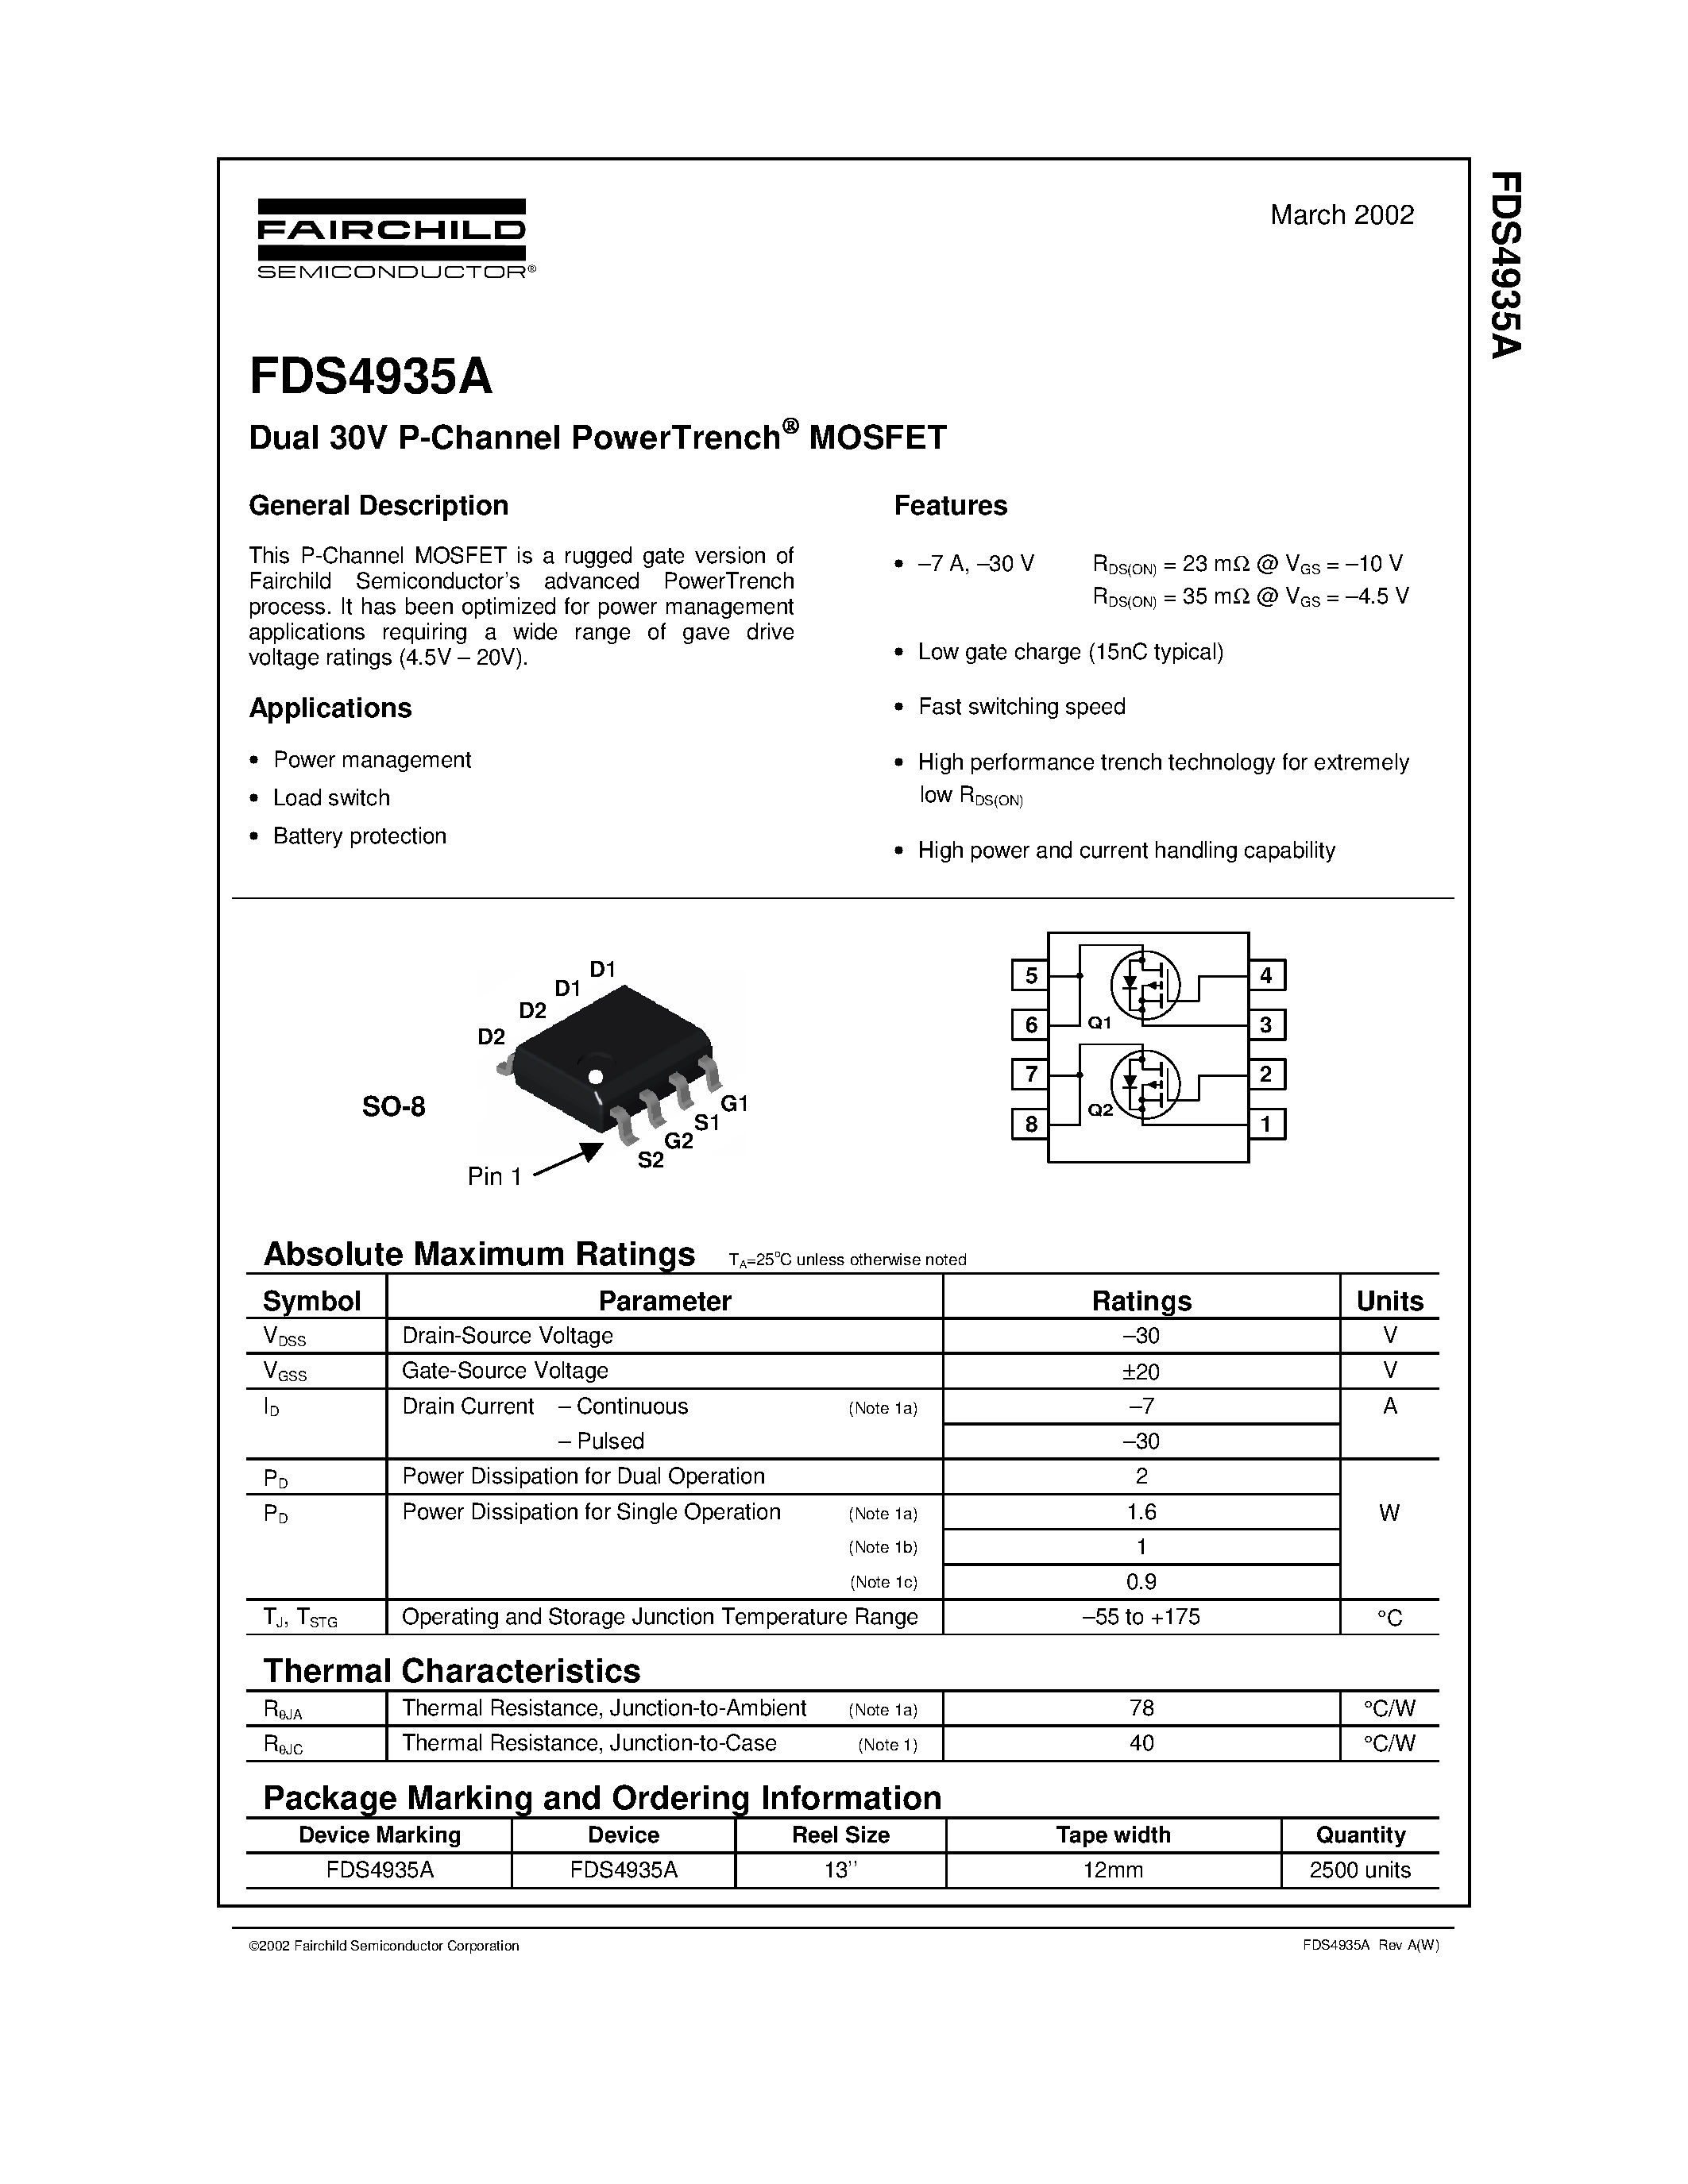 Даташит FDS4935A - Dual 30V P-Channel PowerTrench MOSFET страница 1